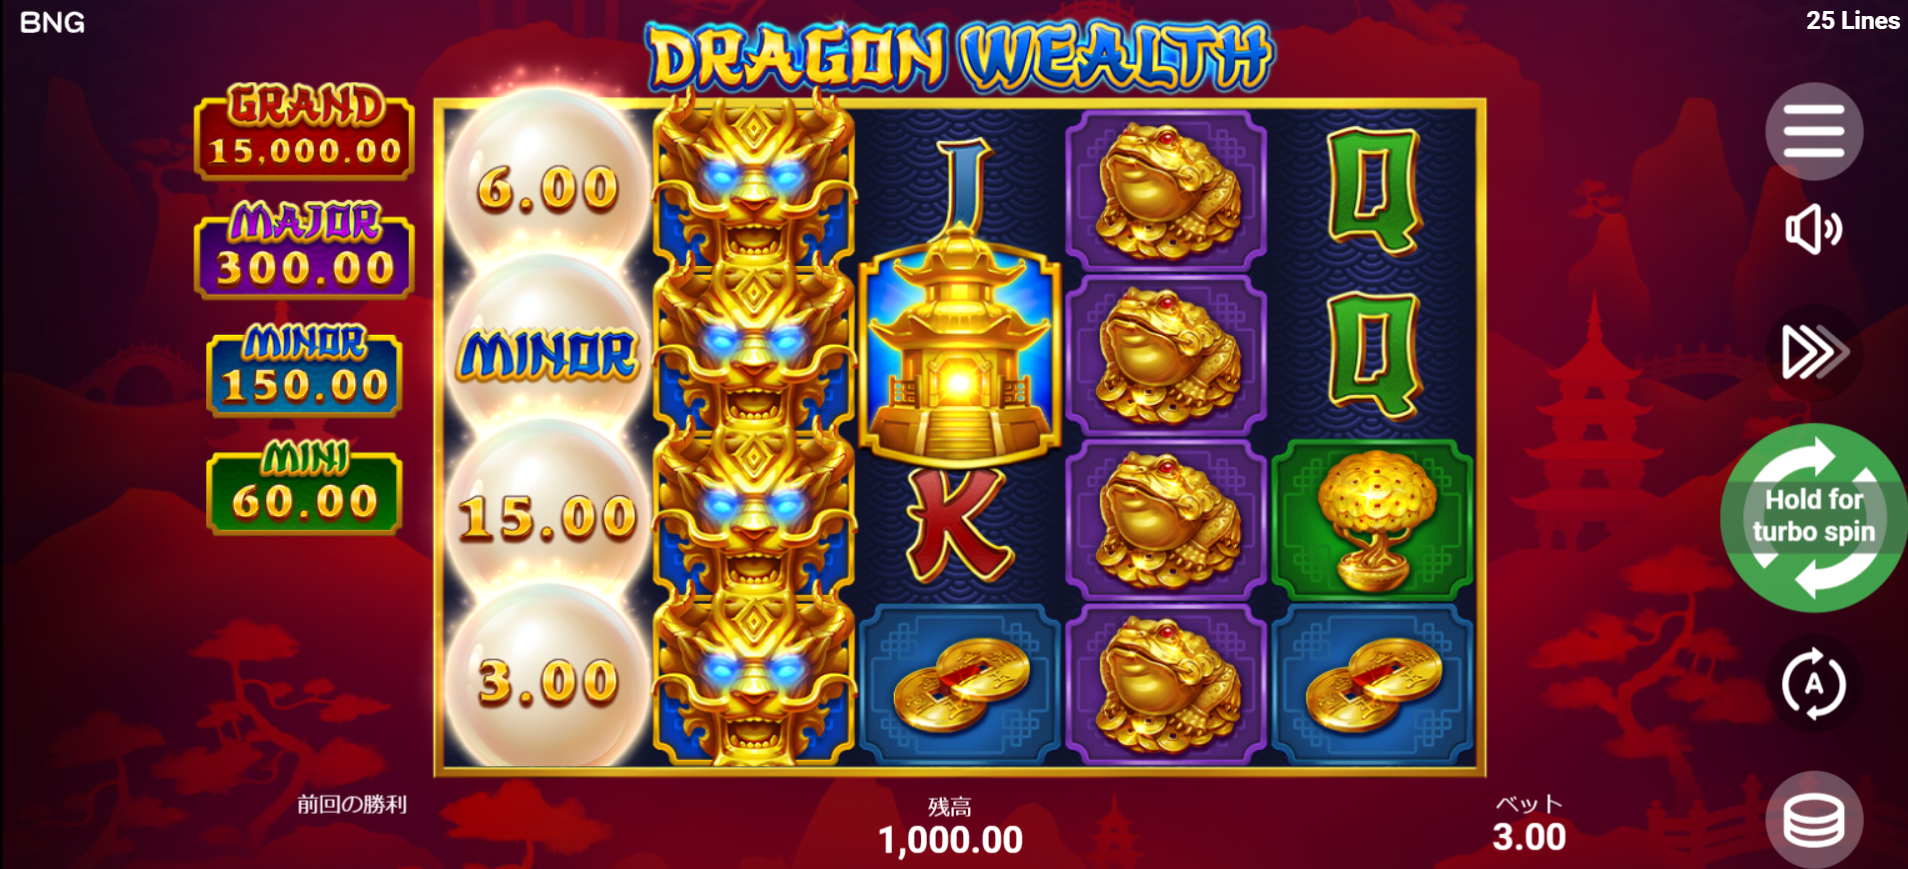 Dragon Wealth Hold and win